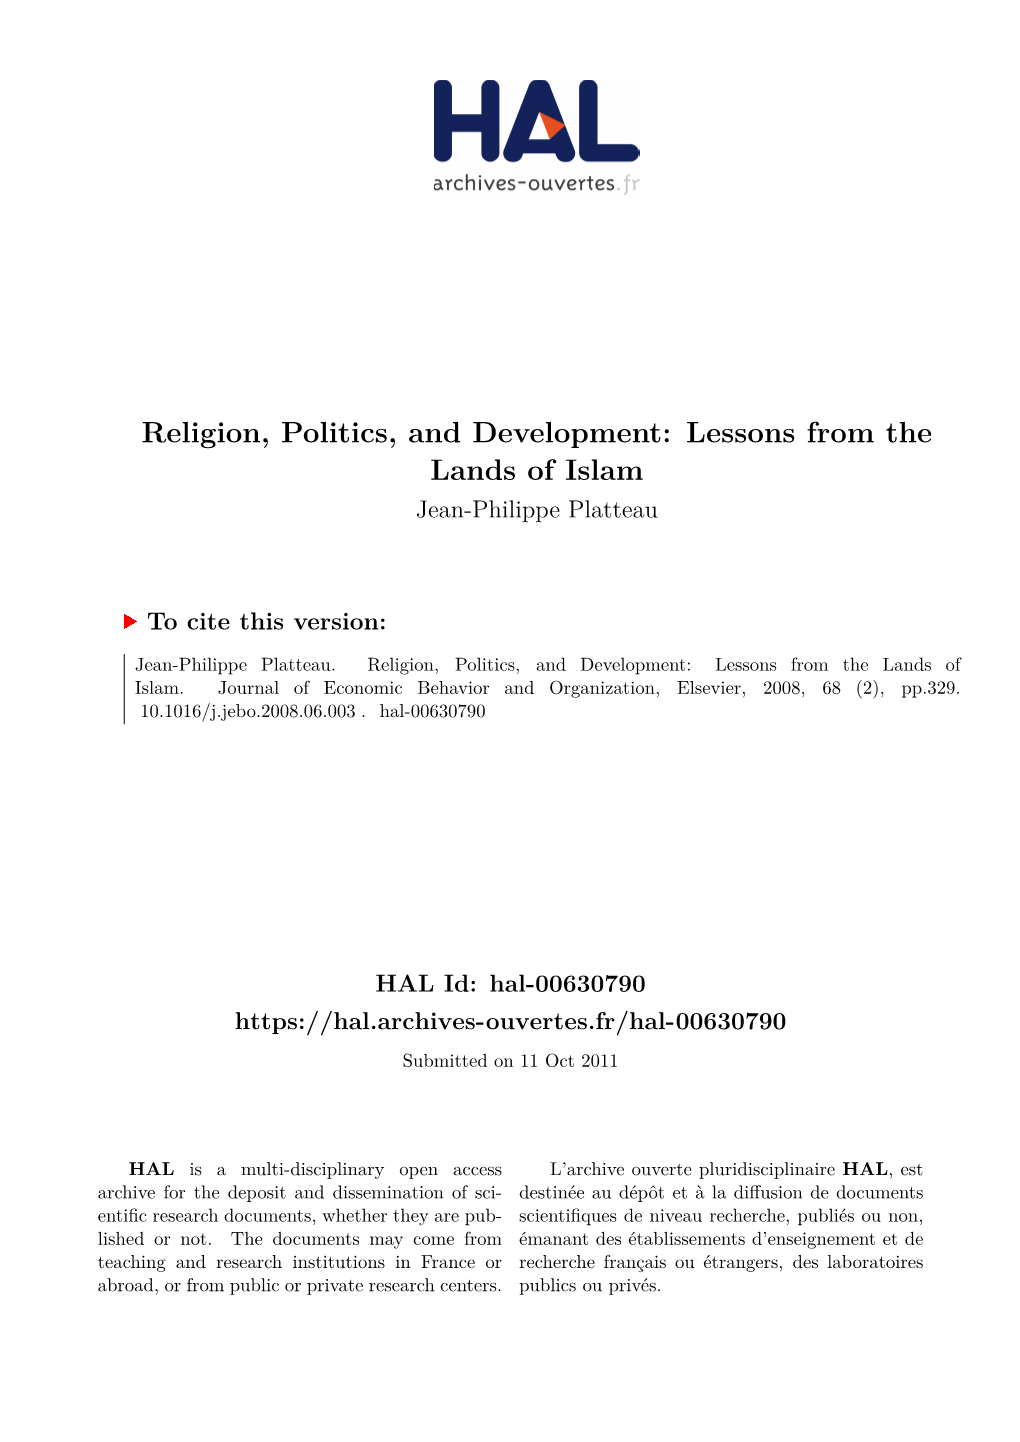 Religion, Politics, and Development: Lessons from the Lands of Islam Jean-Philippe Platteau